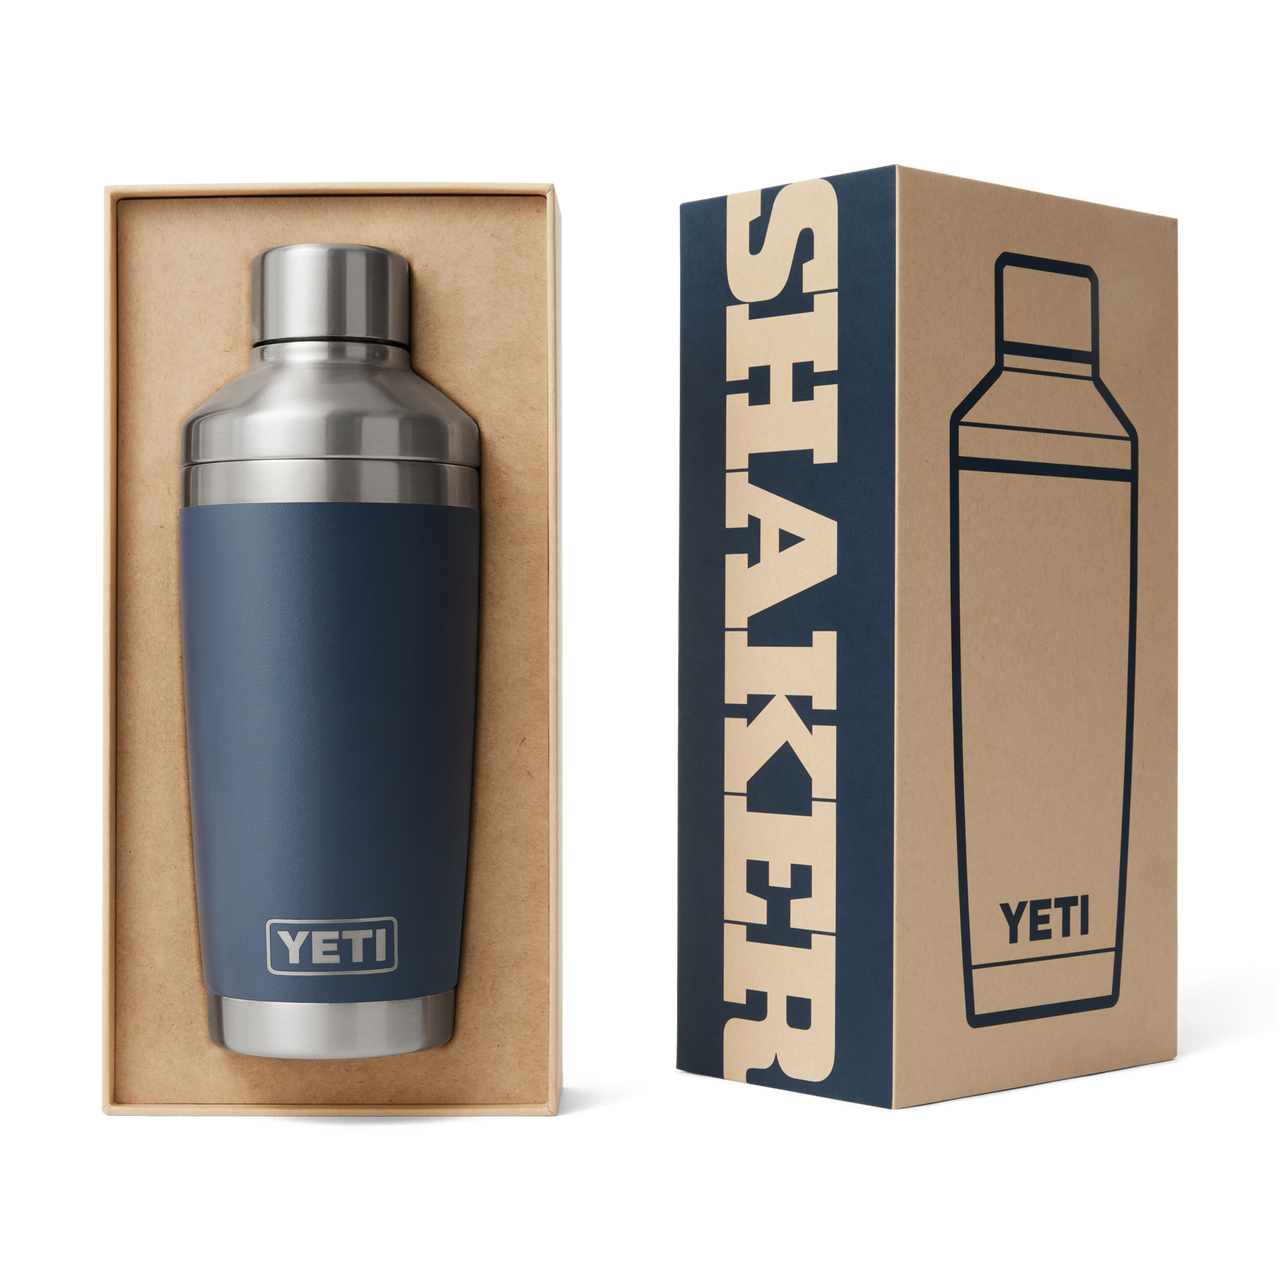 YETI Rambler 20 oz Cocktail Shaker, Stainless Steel, Vacuum Insulated,  Cosmic Lilac